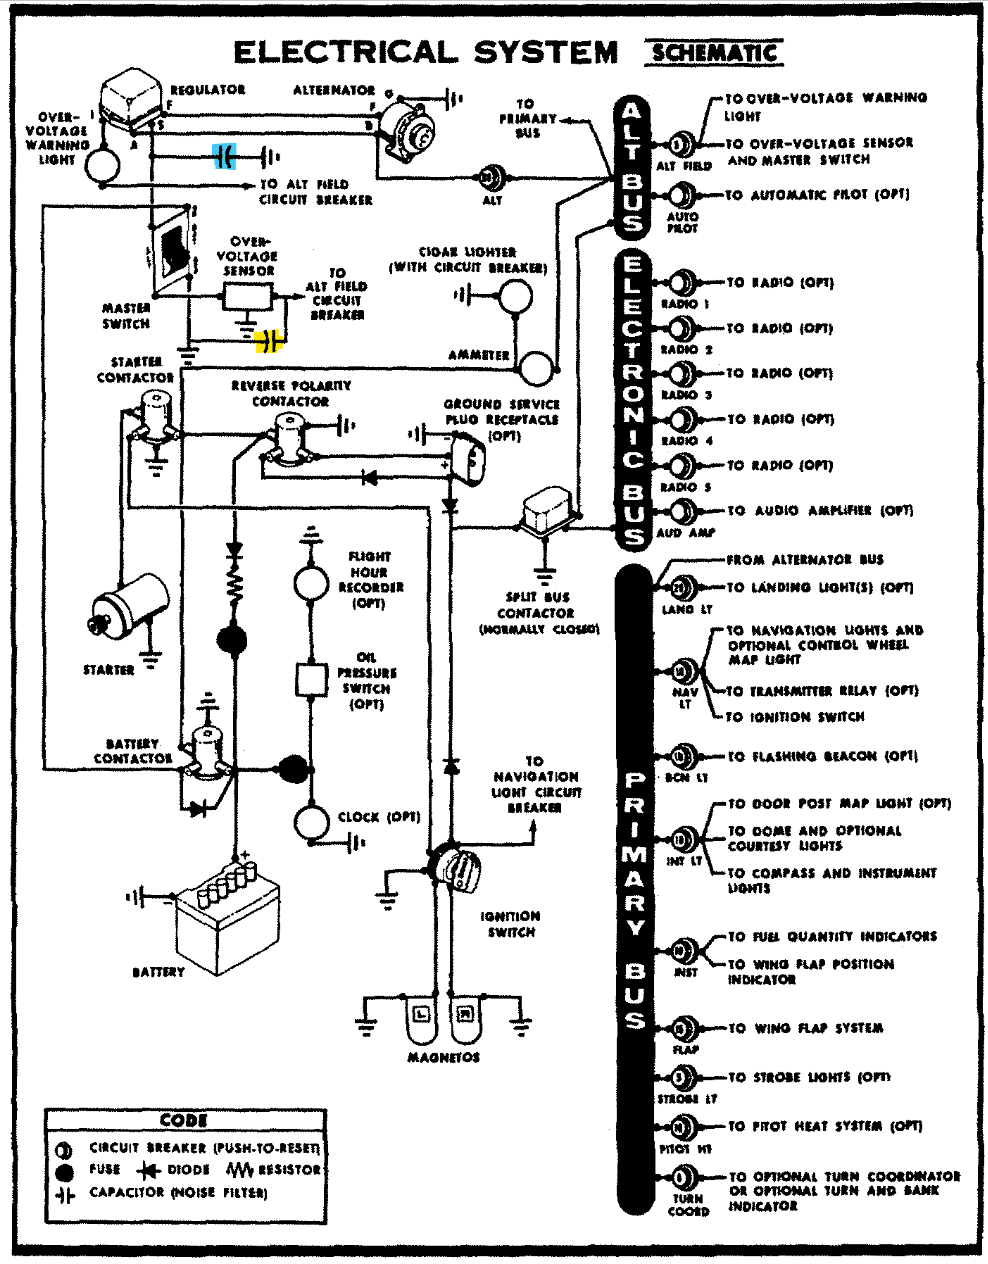 Cessna Aircraft Electrical System